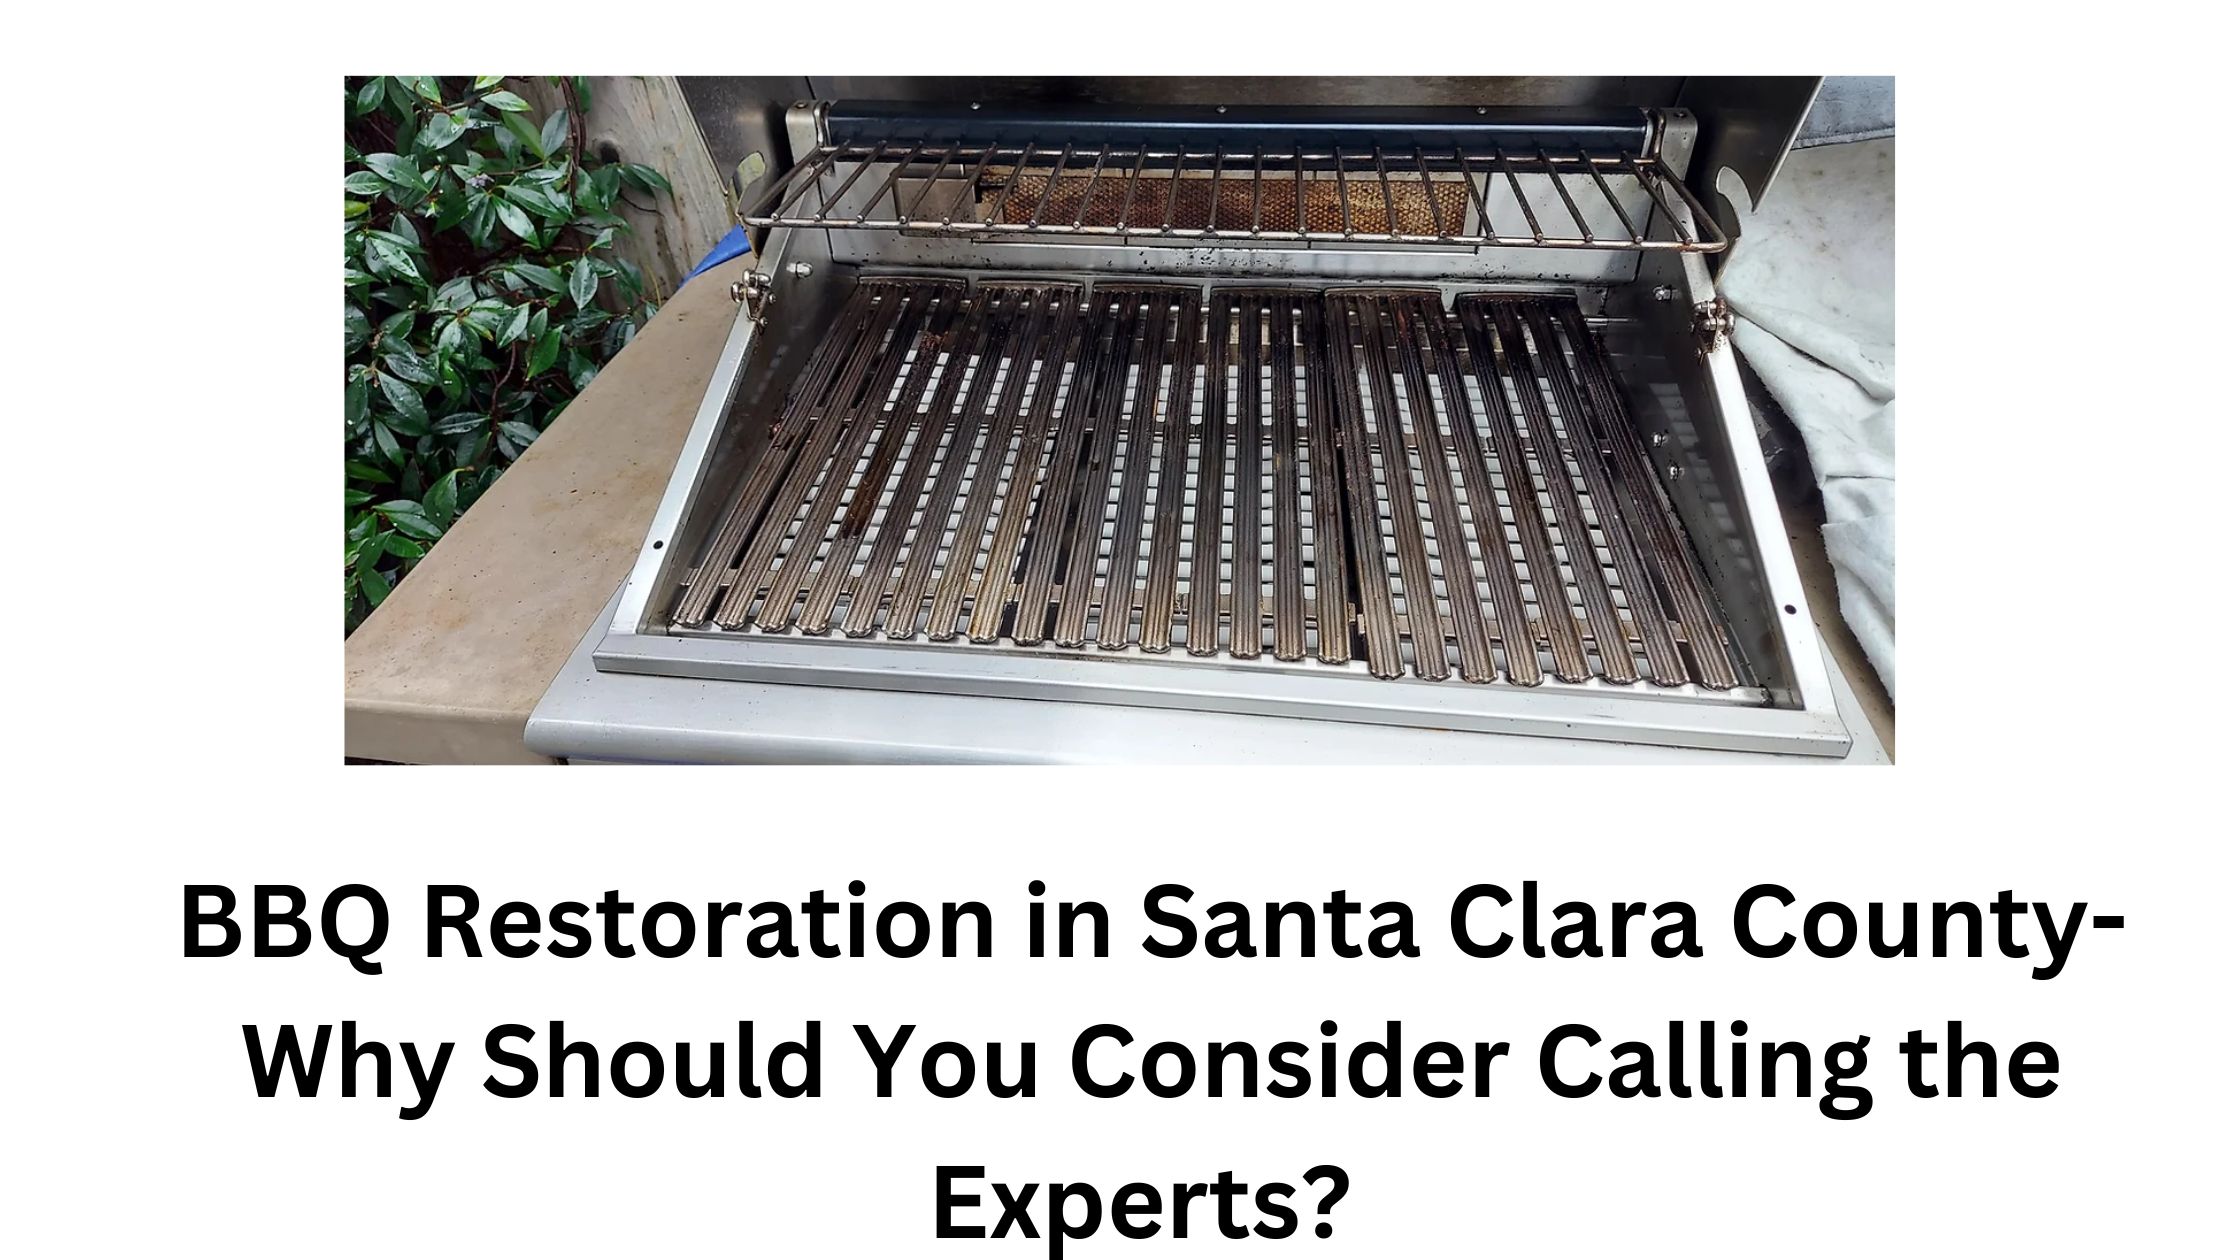 BBQ Restoration in Santa Clara County- Why Should You Consider Calling the Experts